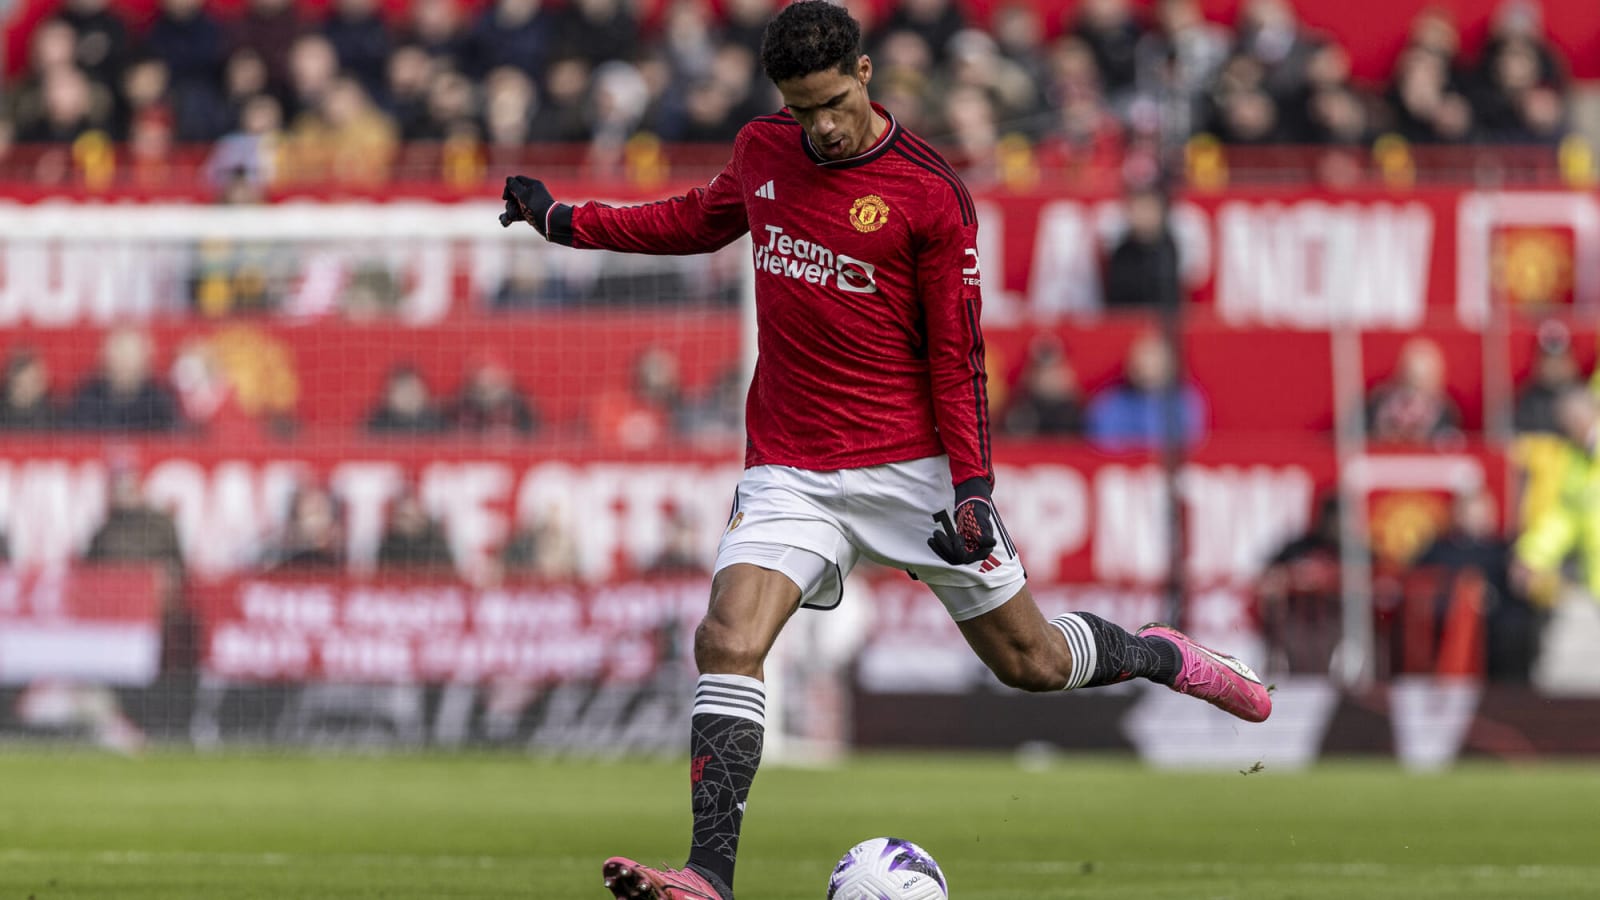 Raphael Varane outlines Manchester United’s vision ahead of Liverpool clash